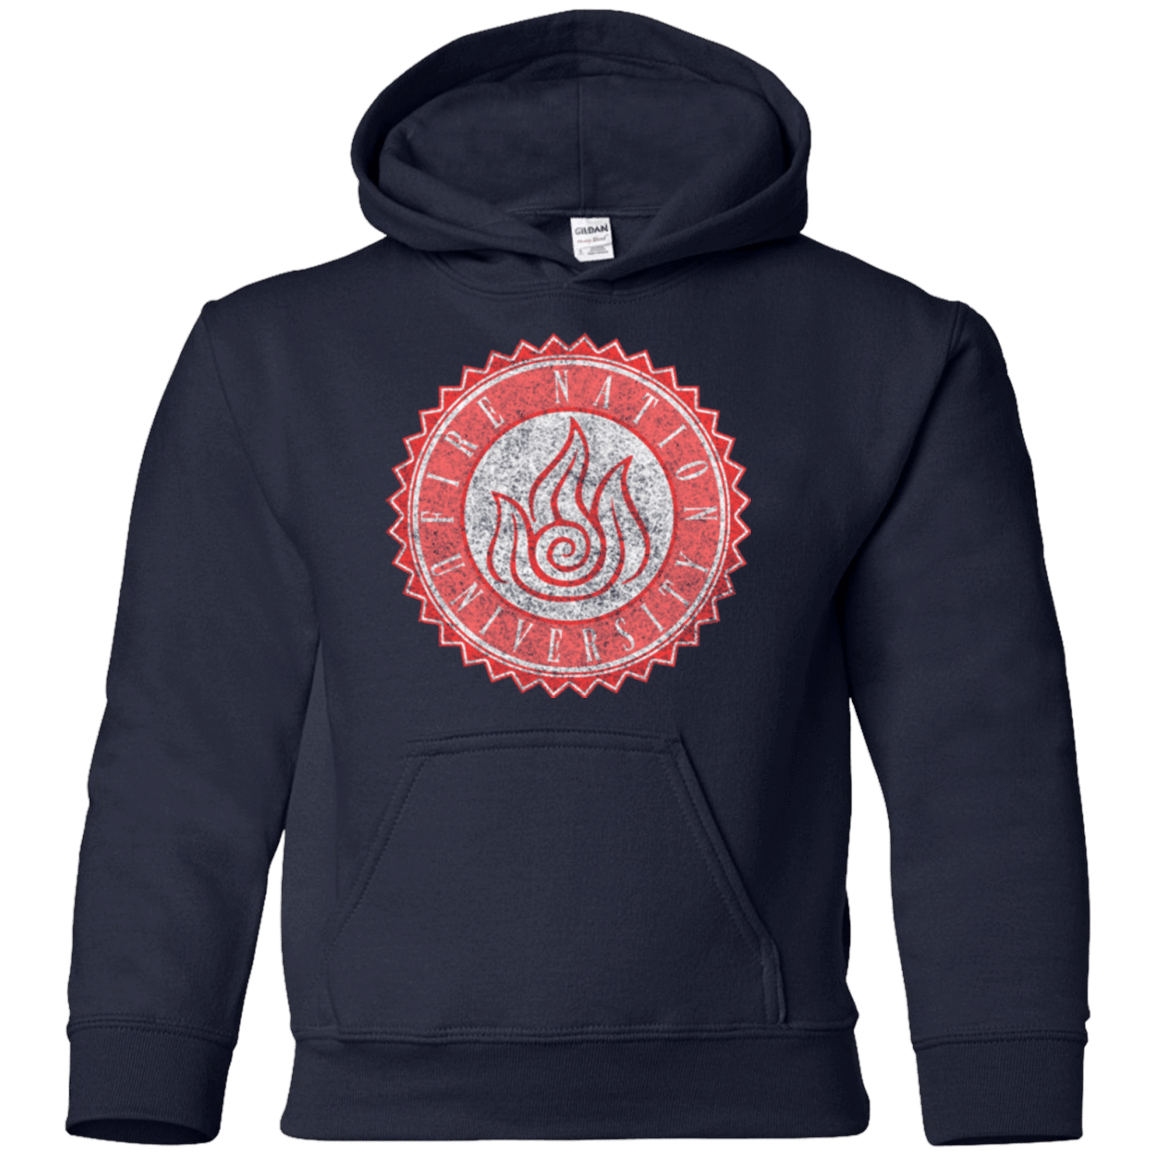 Sweatshirts Navy / YS Fire Nation Univeristy Youth Hoodie